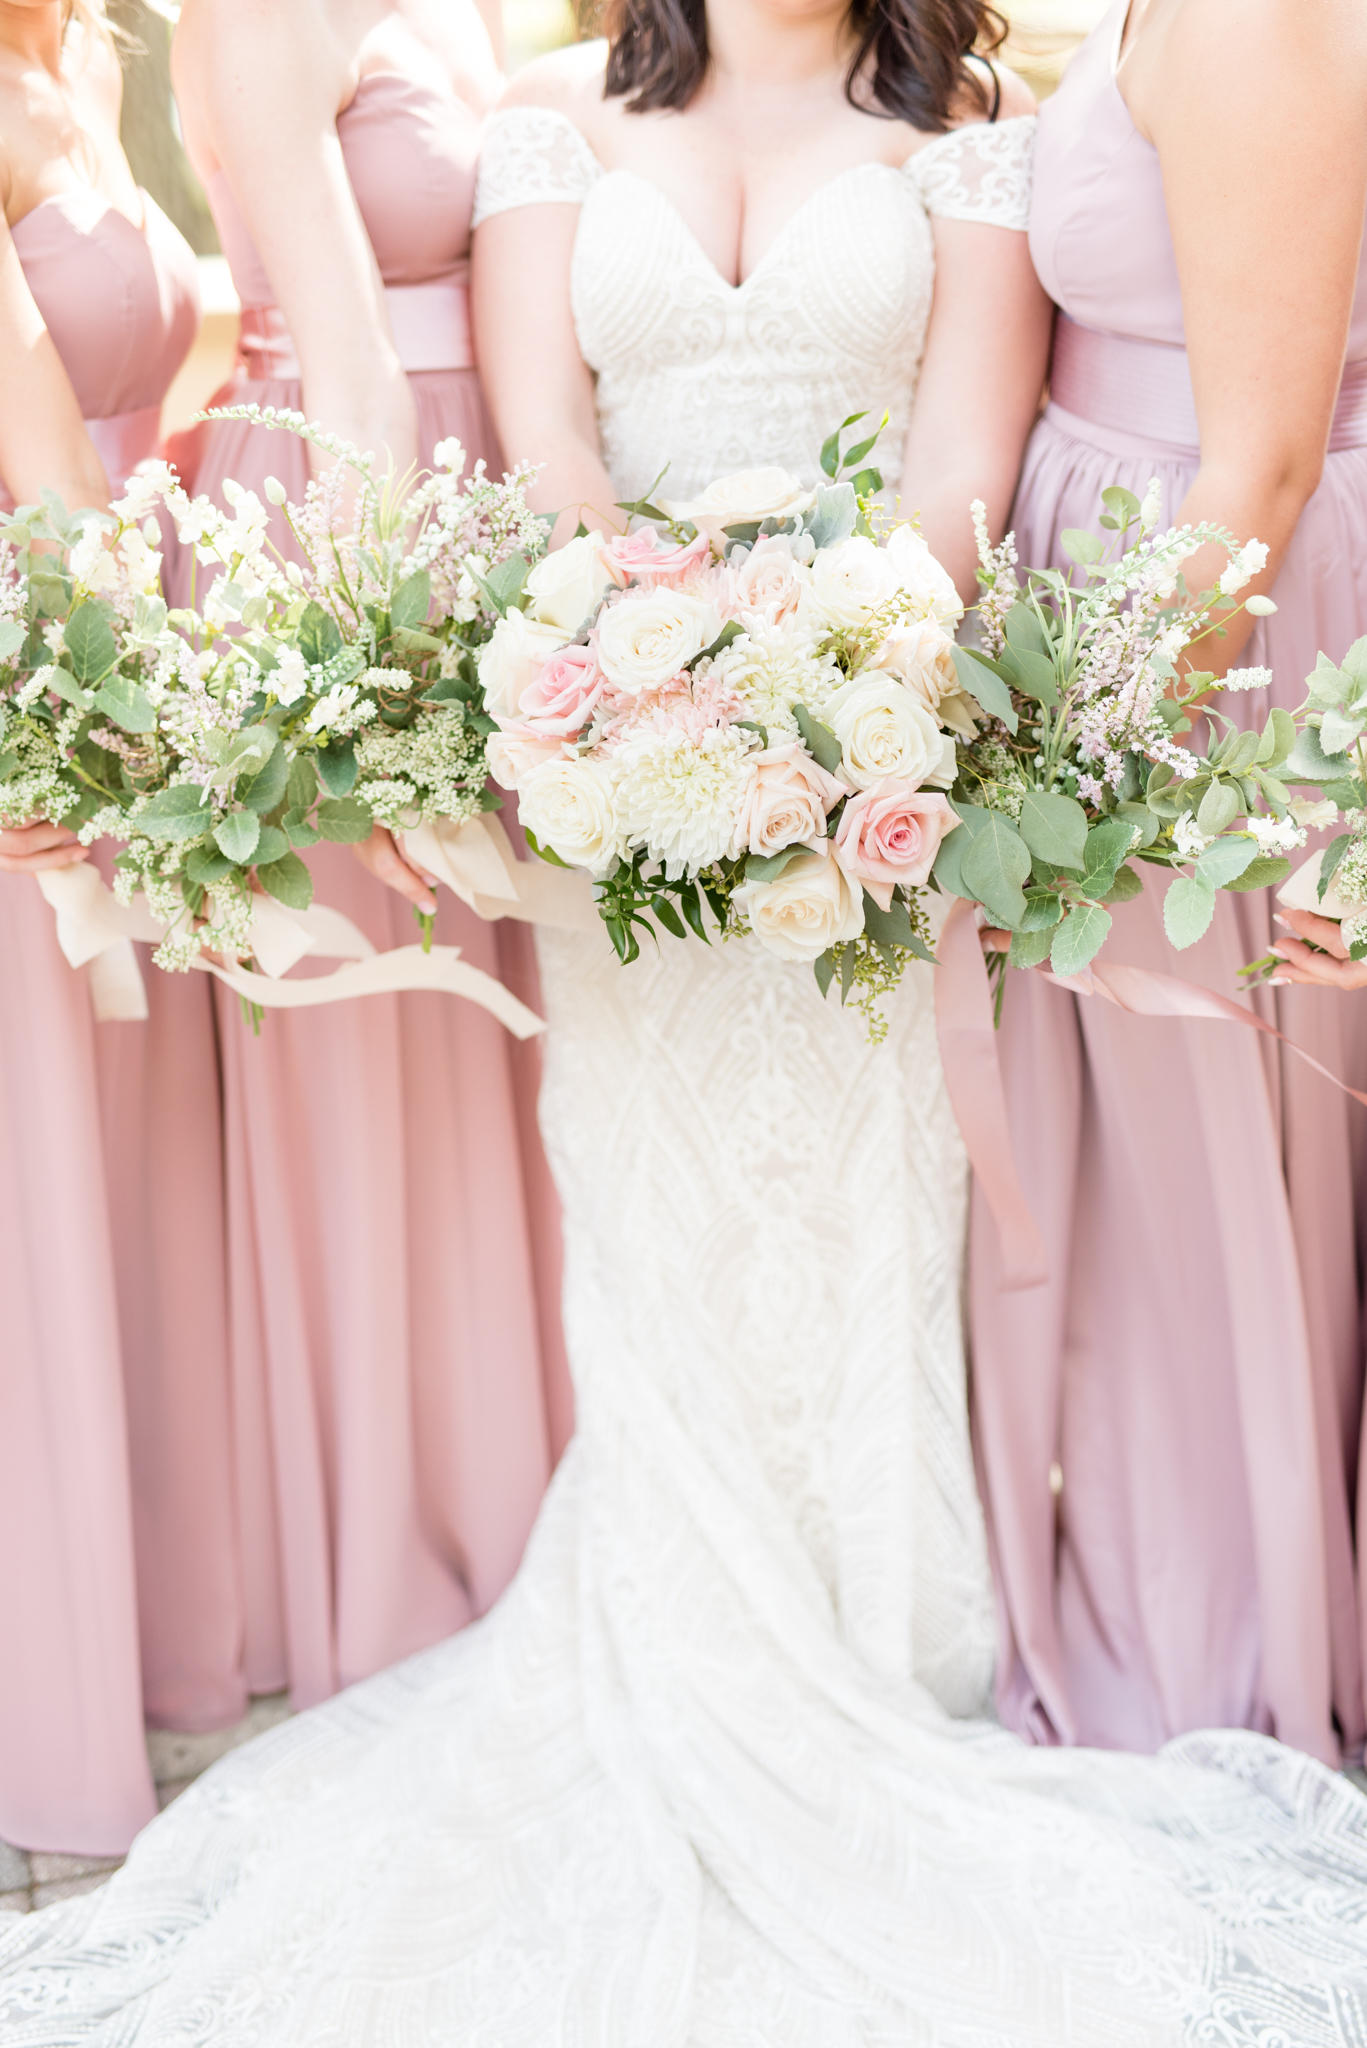 Bride and bridesmaids holding flowers.